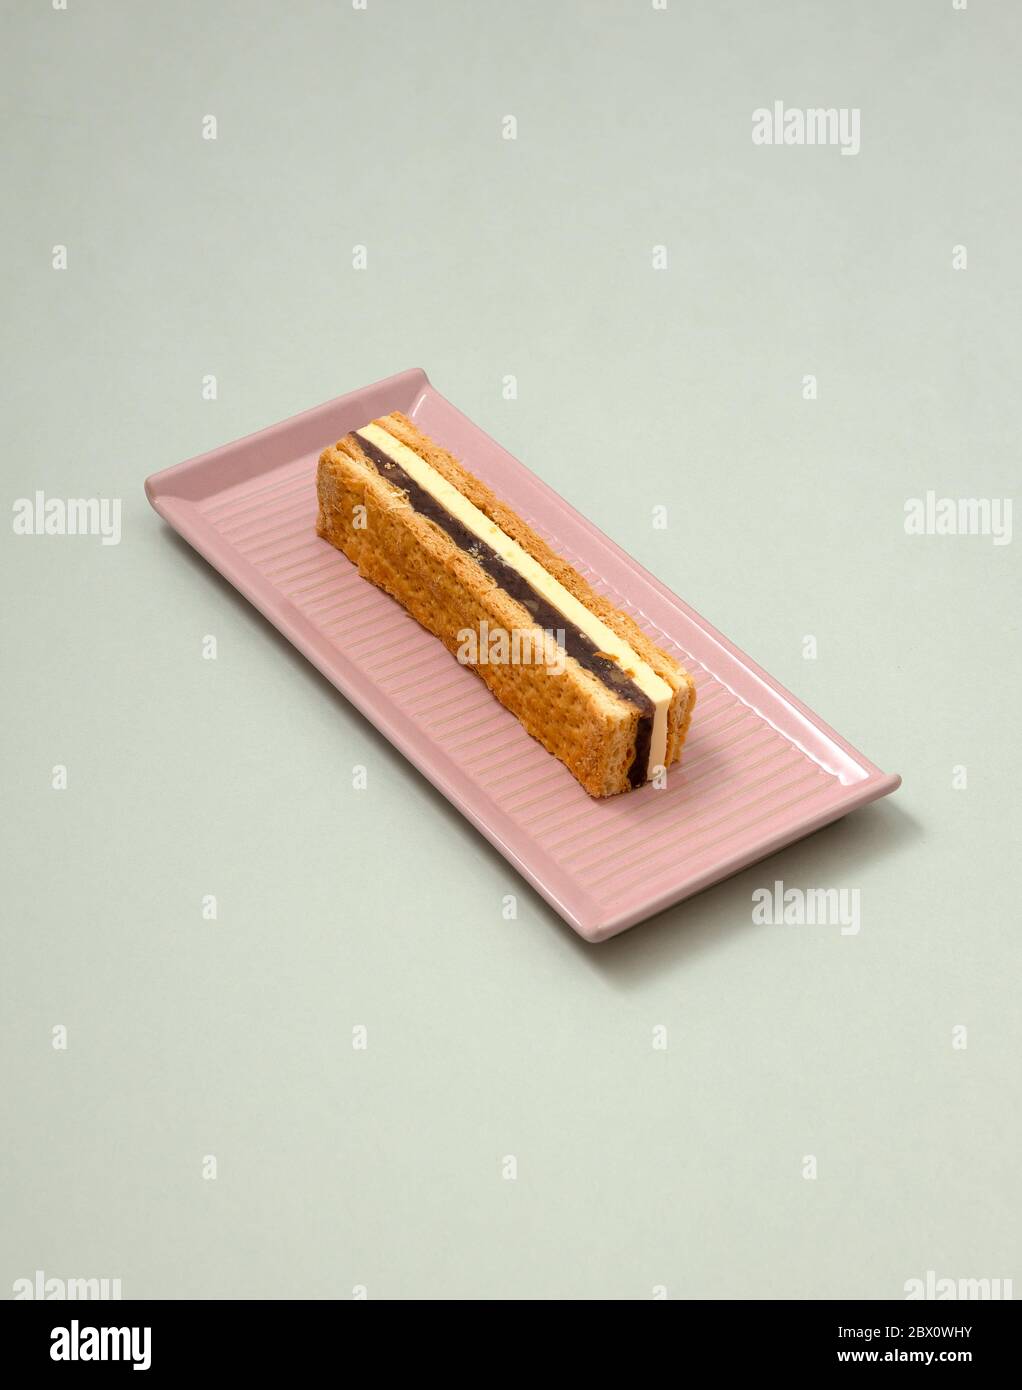 Japanese cuisine with red bean concoction and butter in bread. Stock Photo